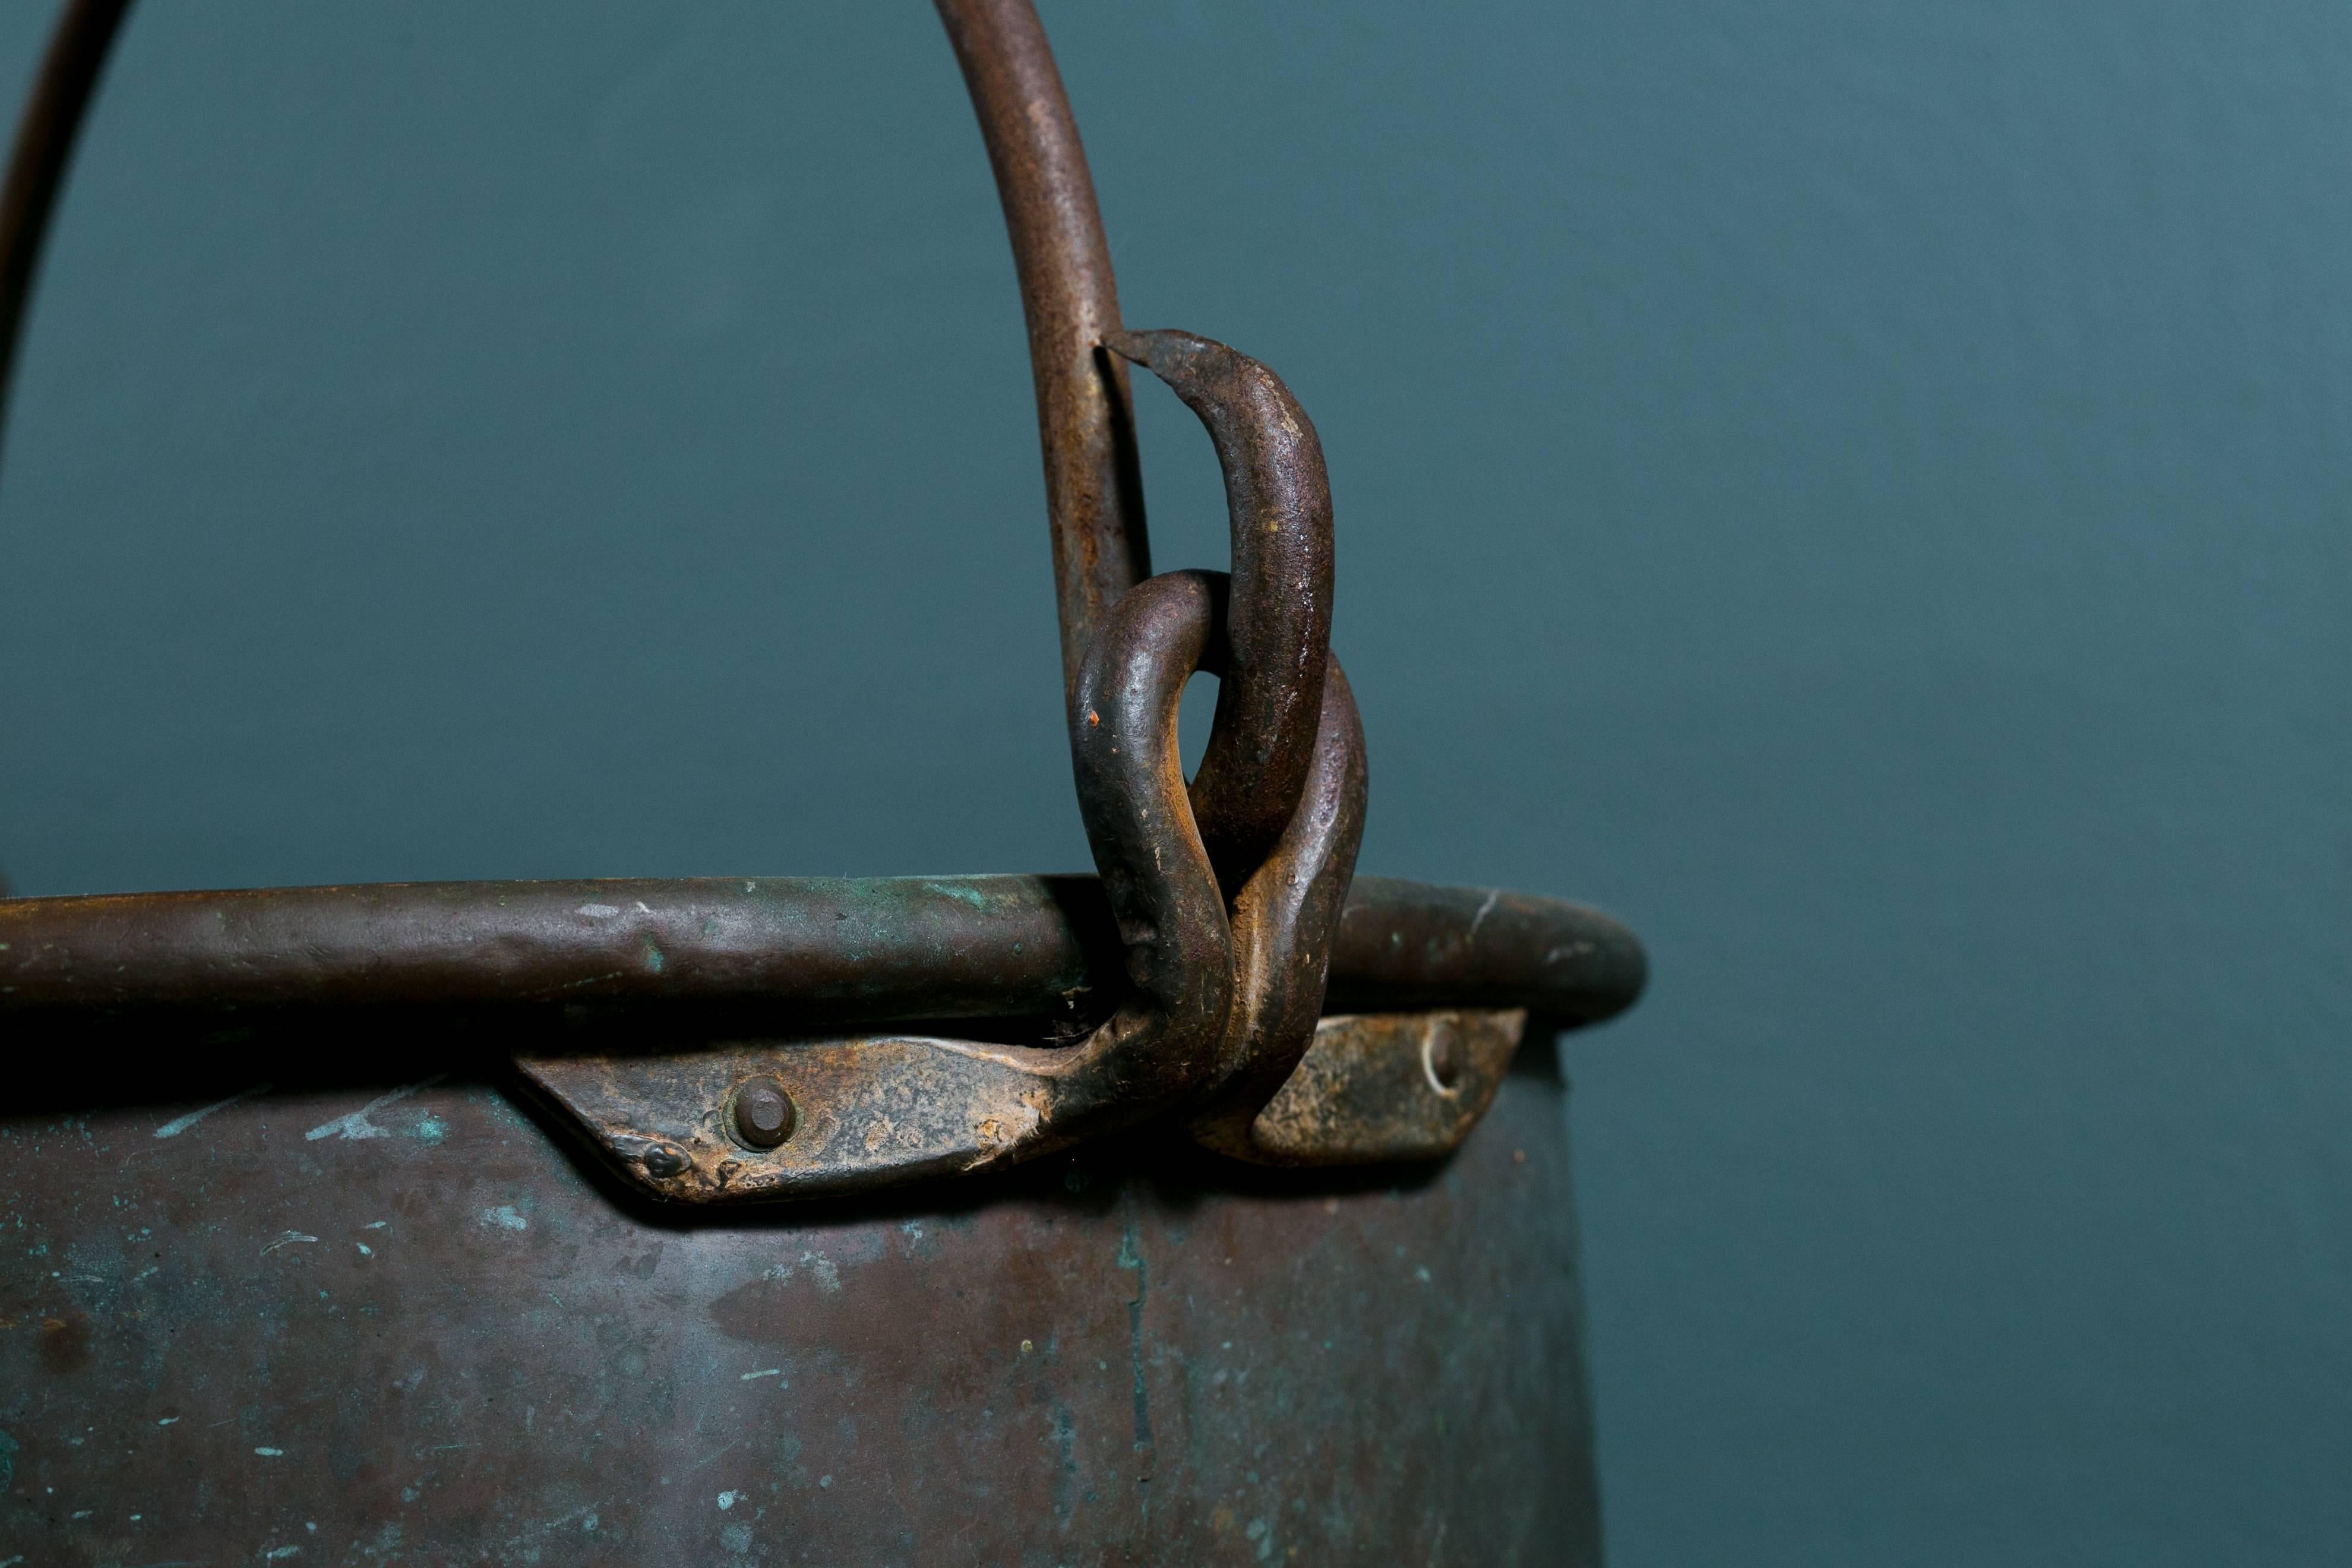 Antique French copper pot or bucket with iron handle (circa 1890). All hand-forged with beautiful verdigris patina. Multiple pots available - all similar in size but each one-of-a-kind. Makes an attractive decorative accessory or container for